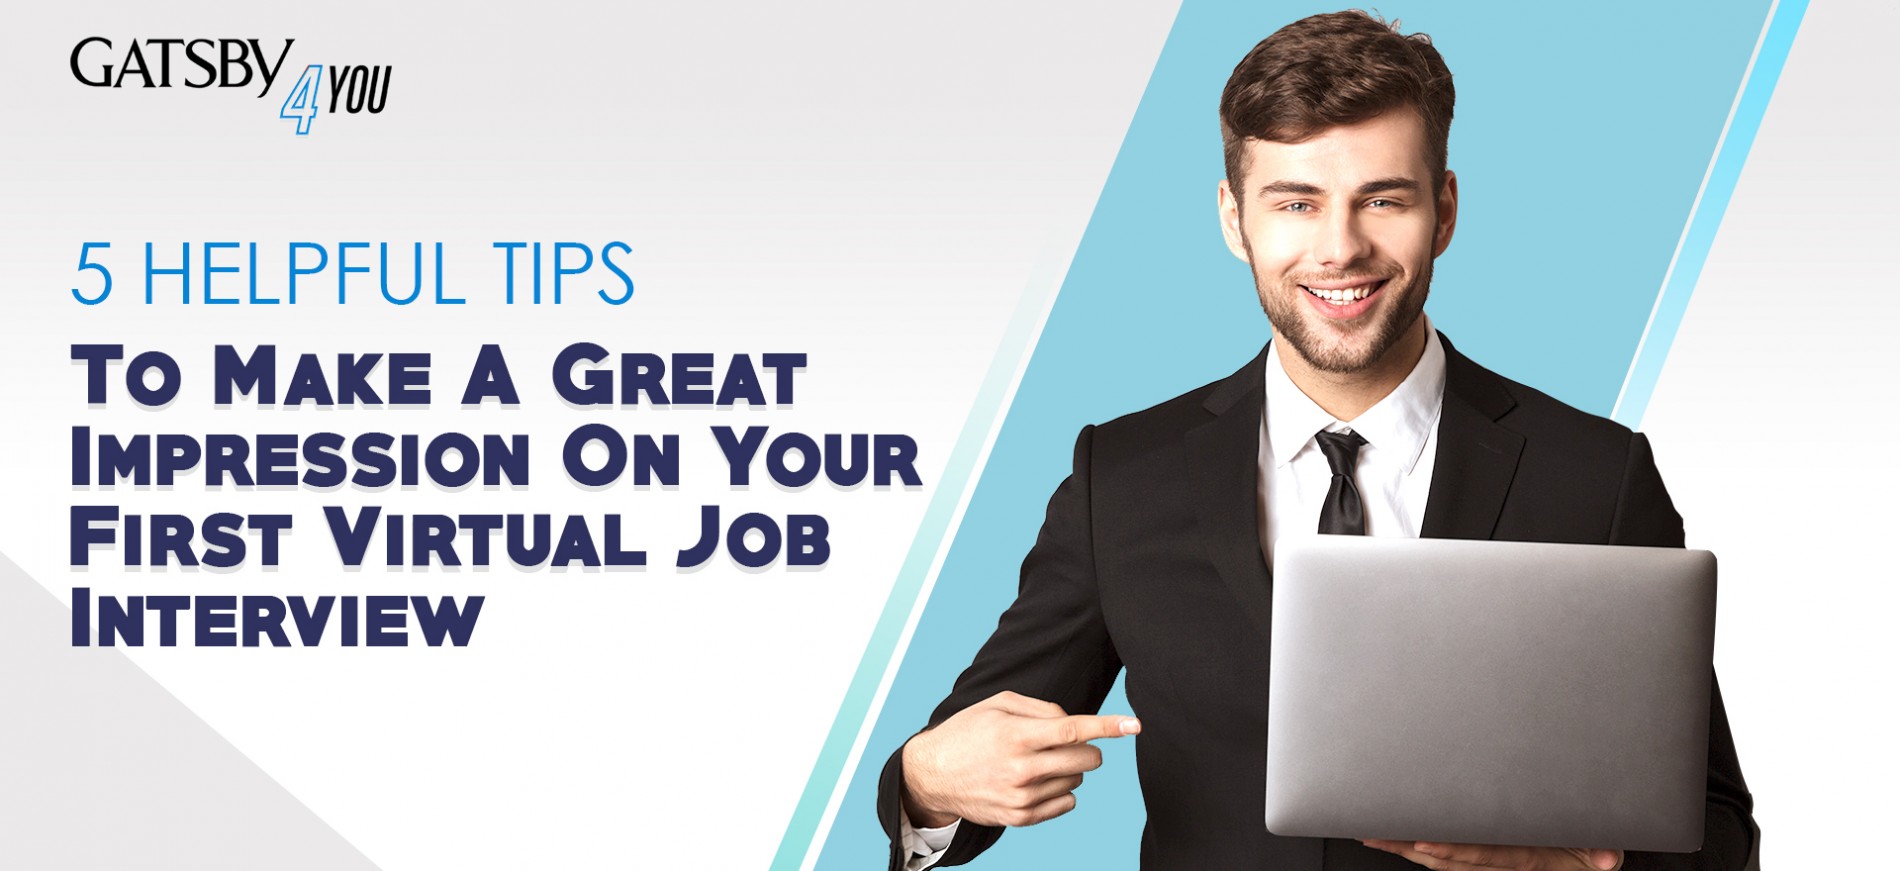 Gatsby Philippines Article 5 Helpful Tips for an Online Job Interview